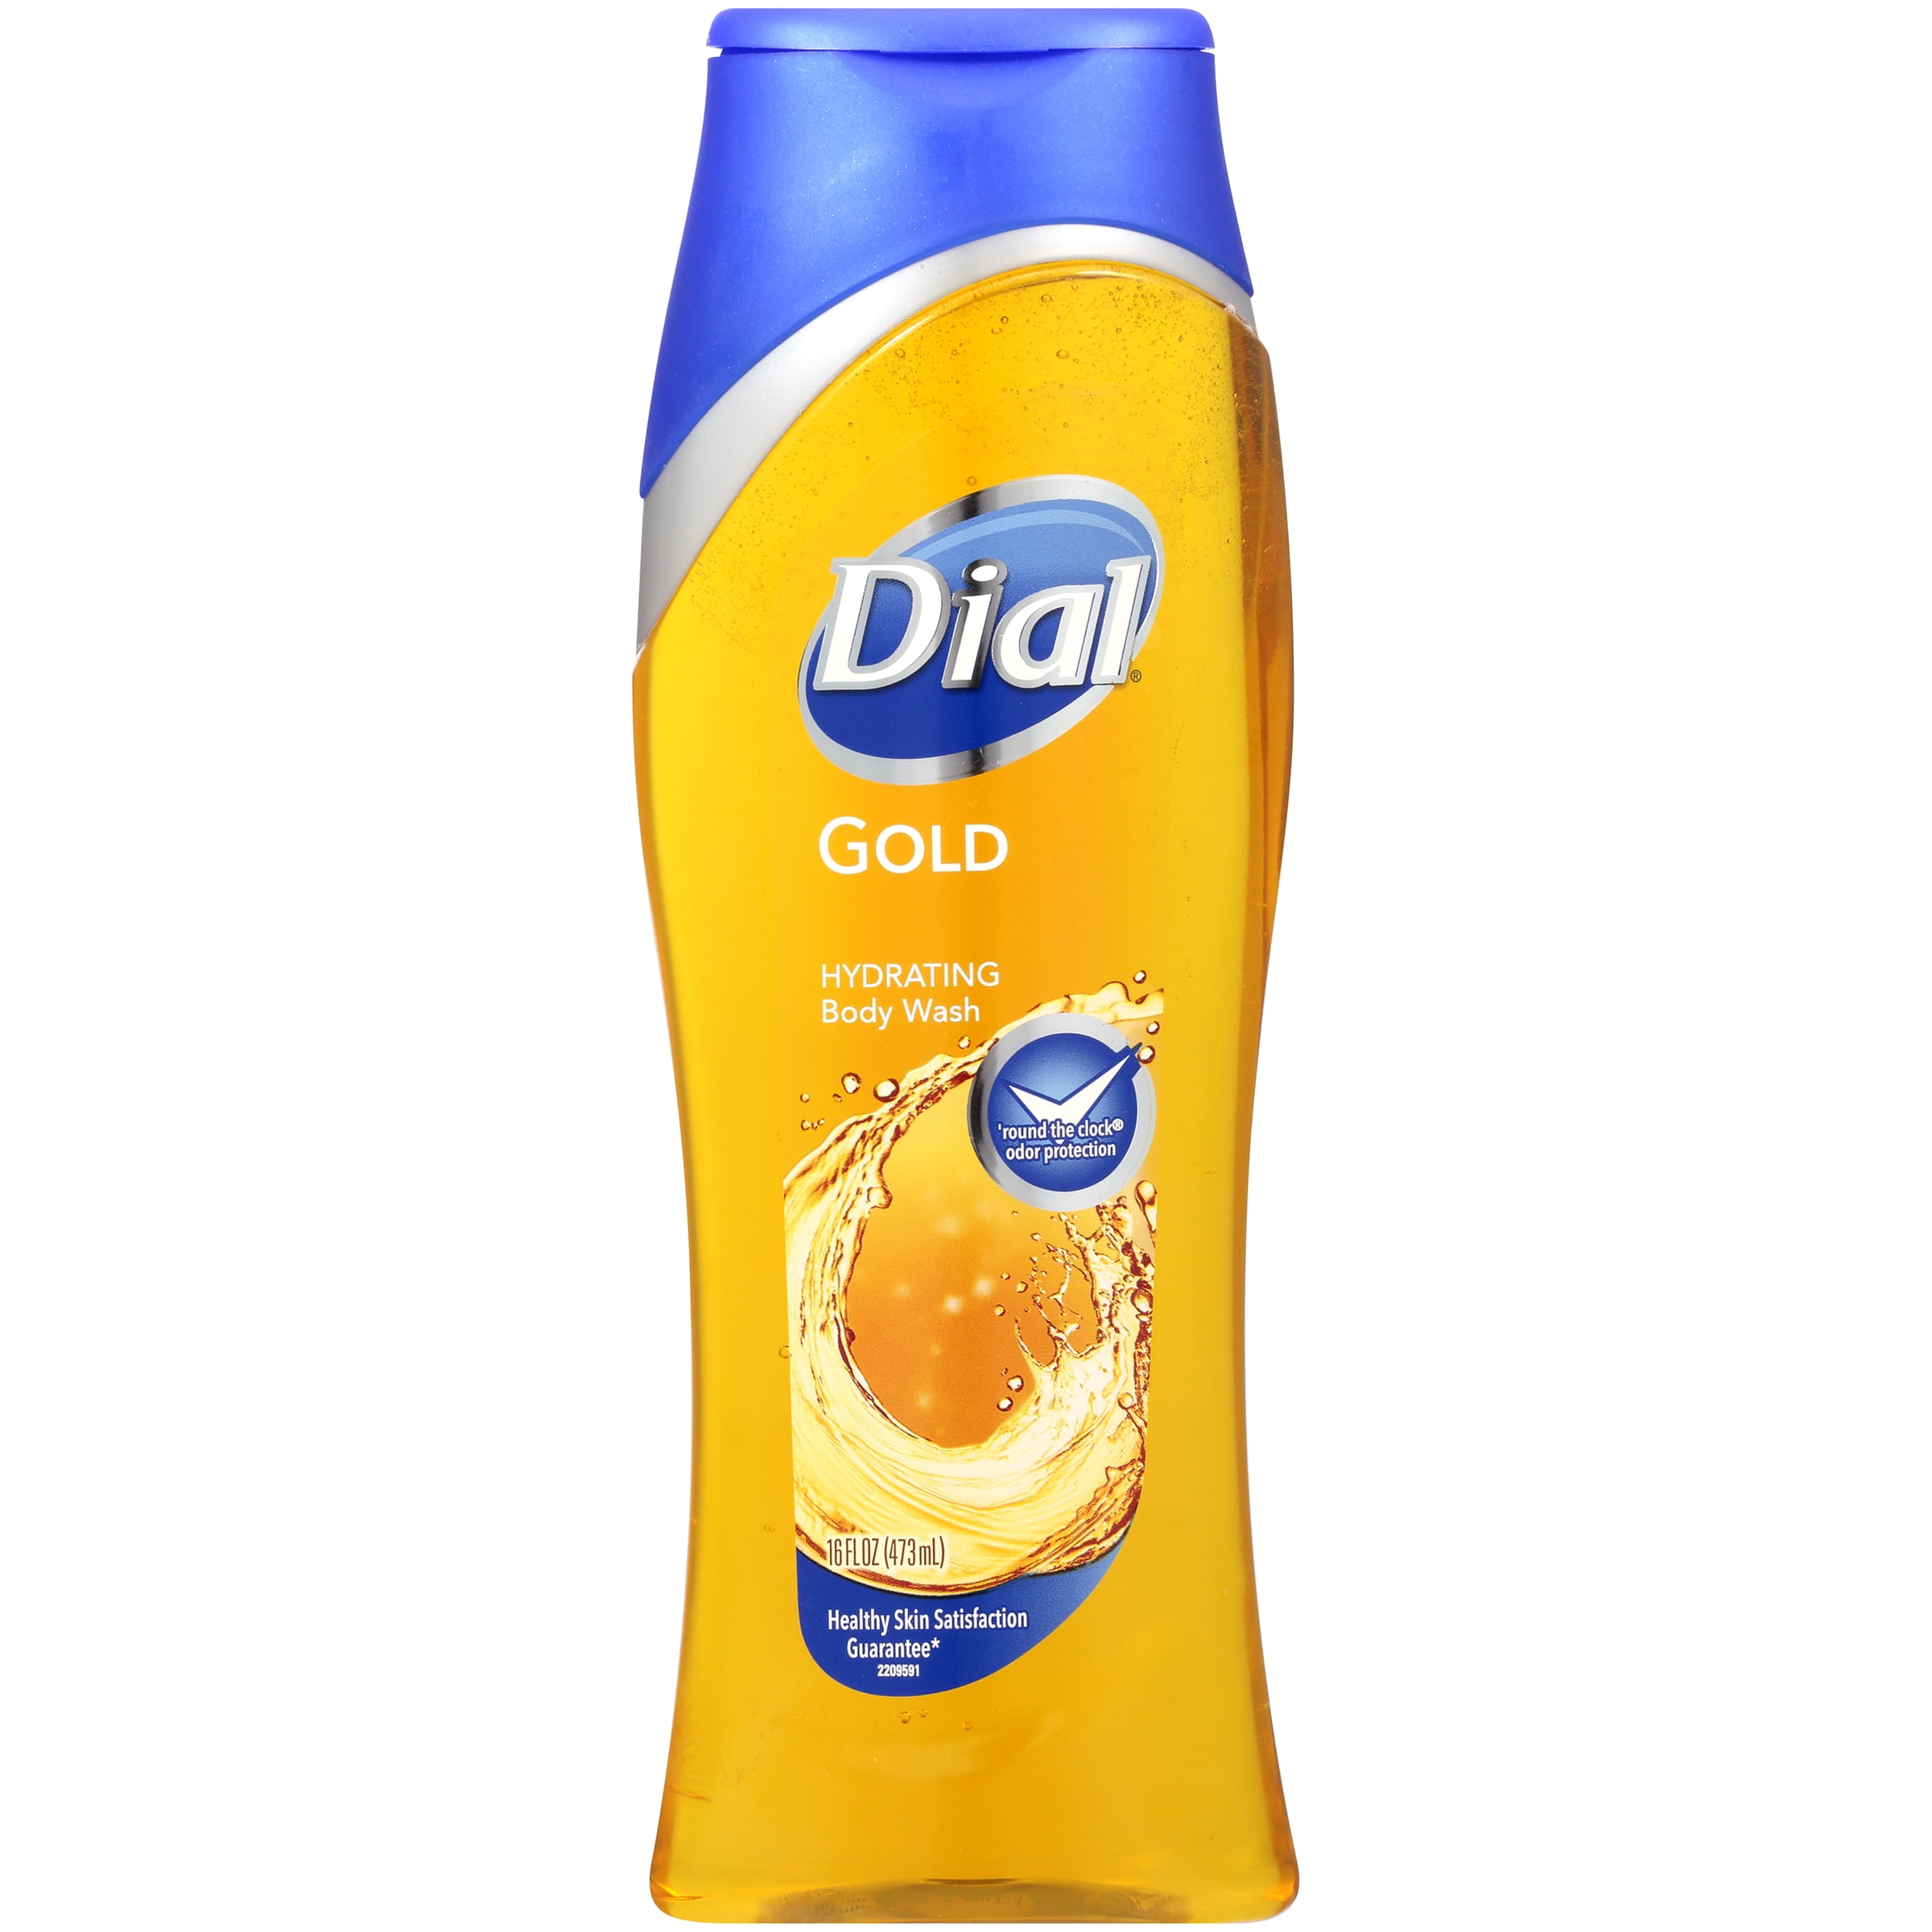 Buy Dial Body Wash Gold 16 Fl Oz Online At Lowest Price In Ubuy Nepal